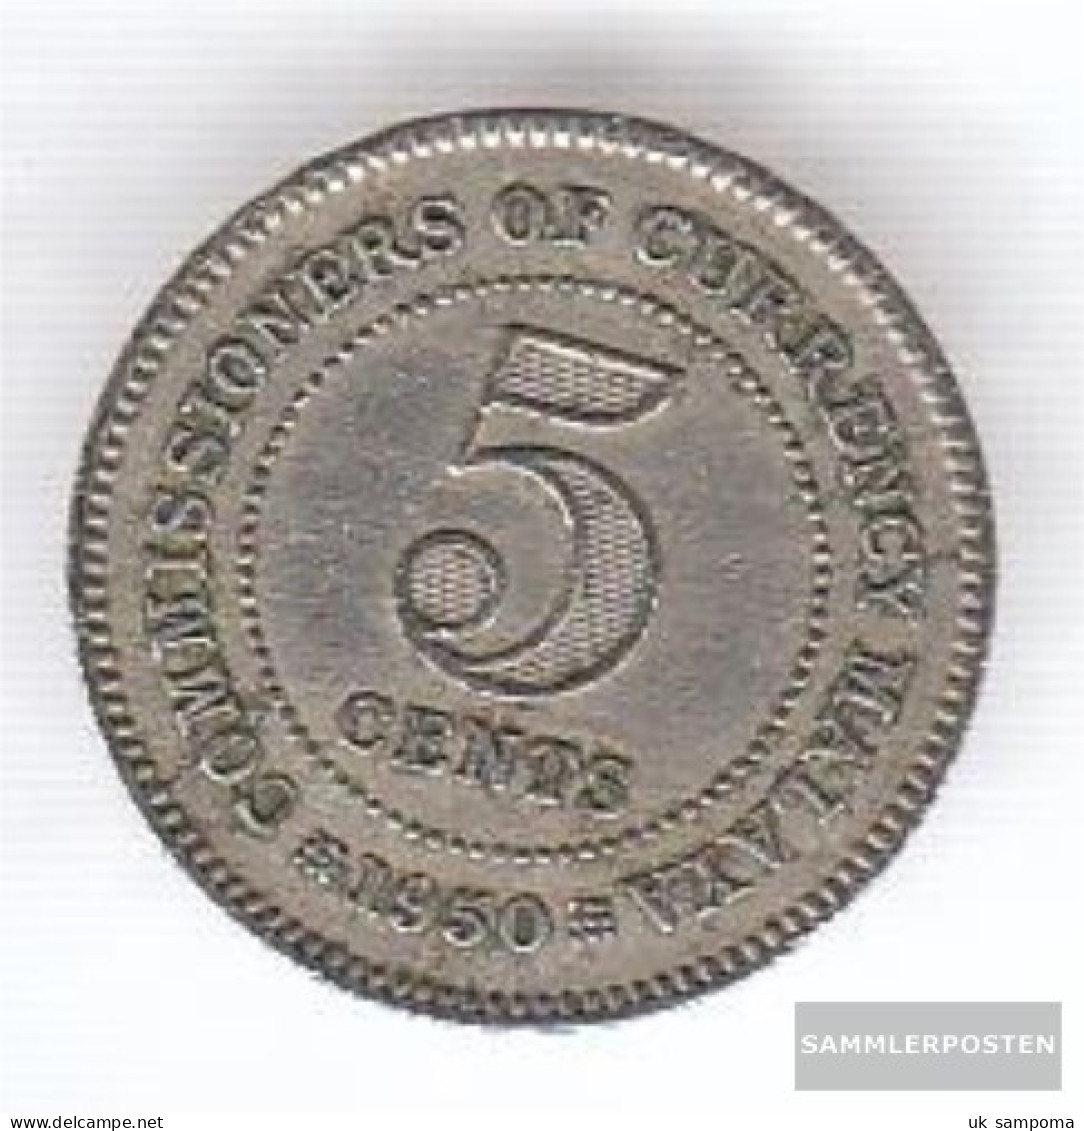 UK Administration Malaya Km.-number.: 7 1950 Very Fine Copper-Nickel Very Fine 1950 5 Cents George VI. - Colonies